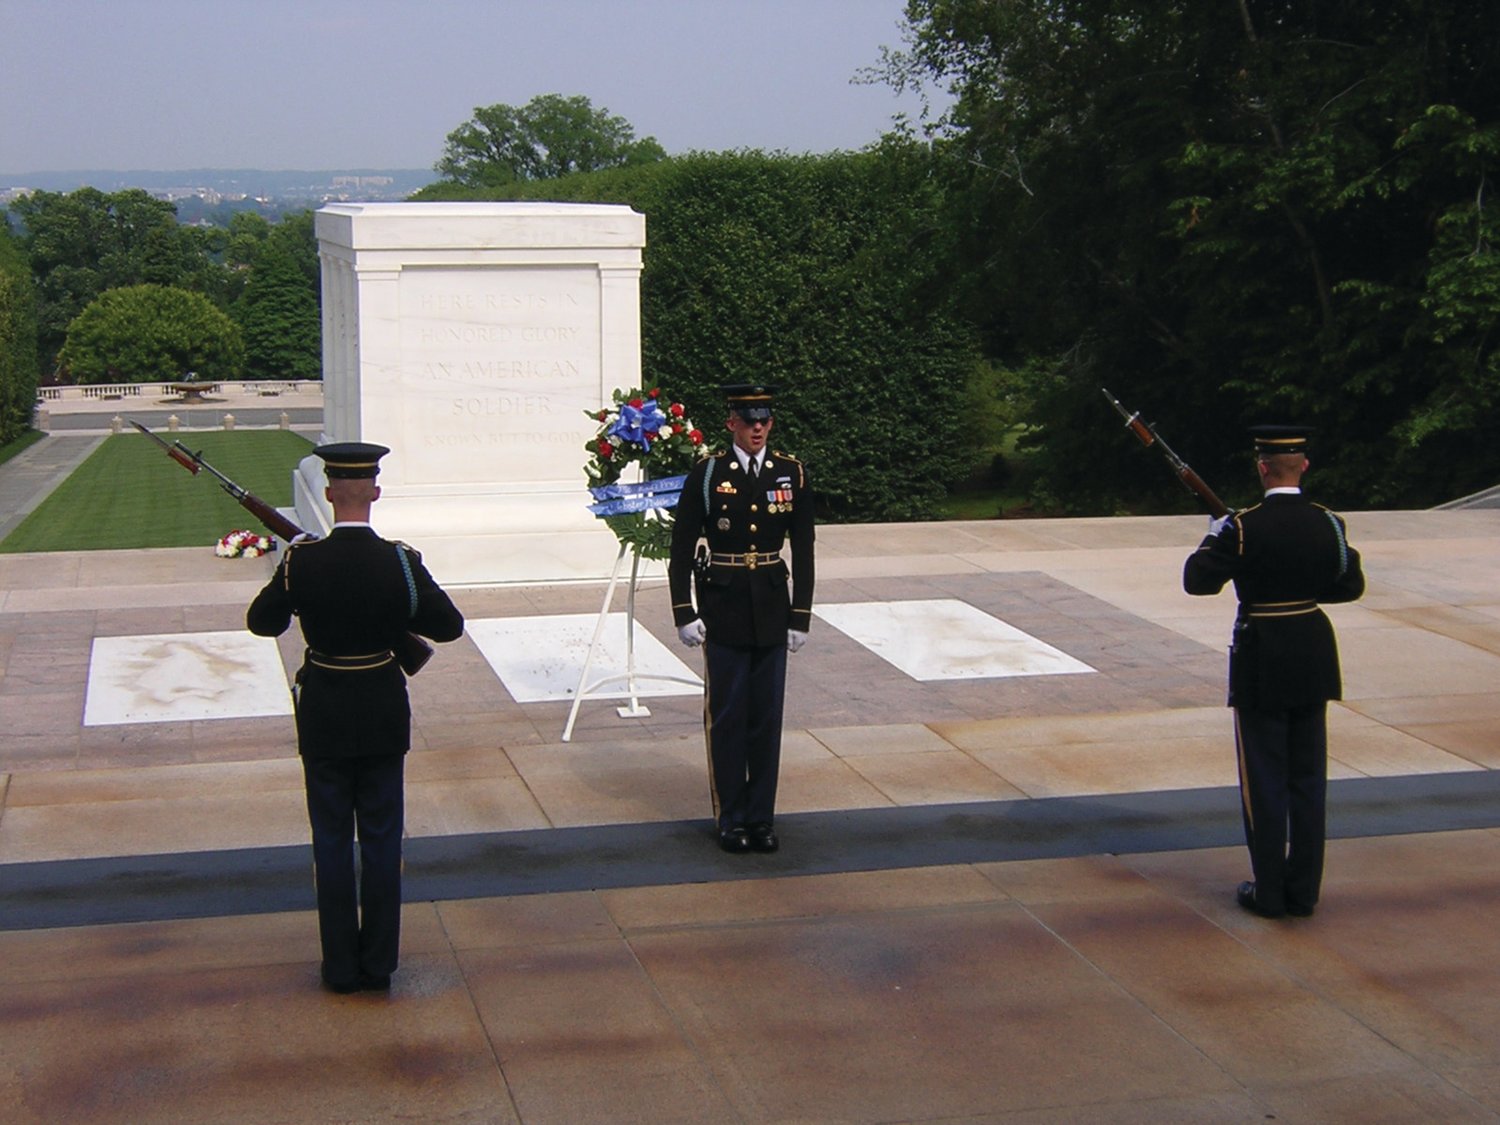 There is never a time when the Tomb of the Unknown Soldier is unguarded.